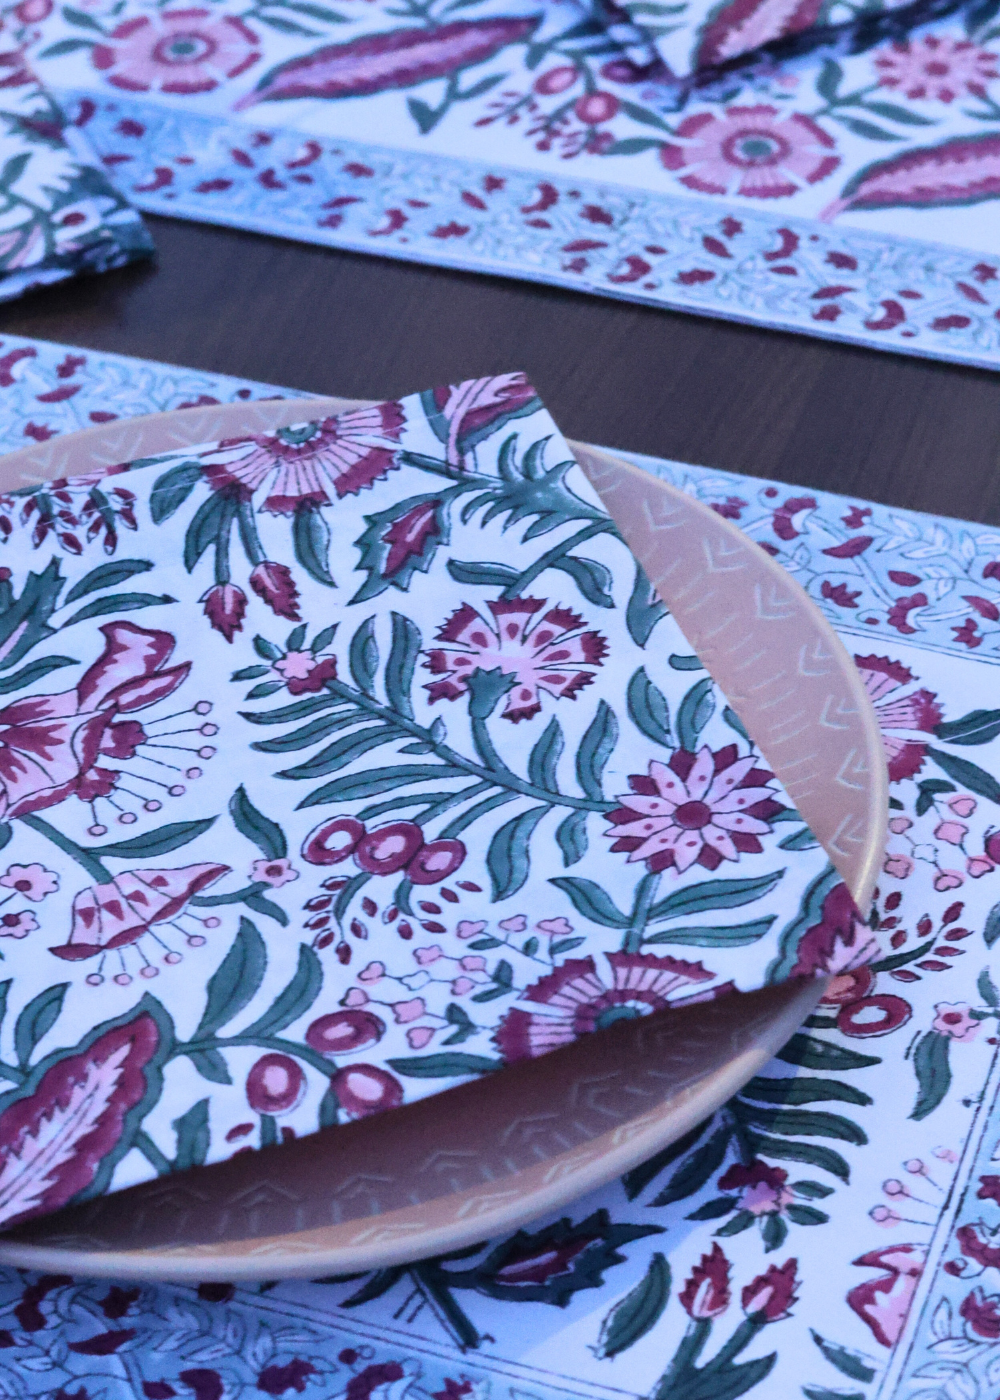 floral patterned block printed table napkin